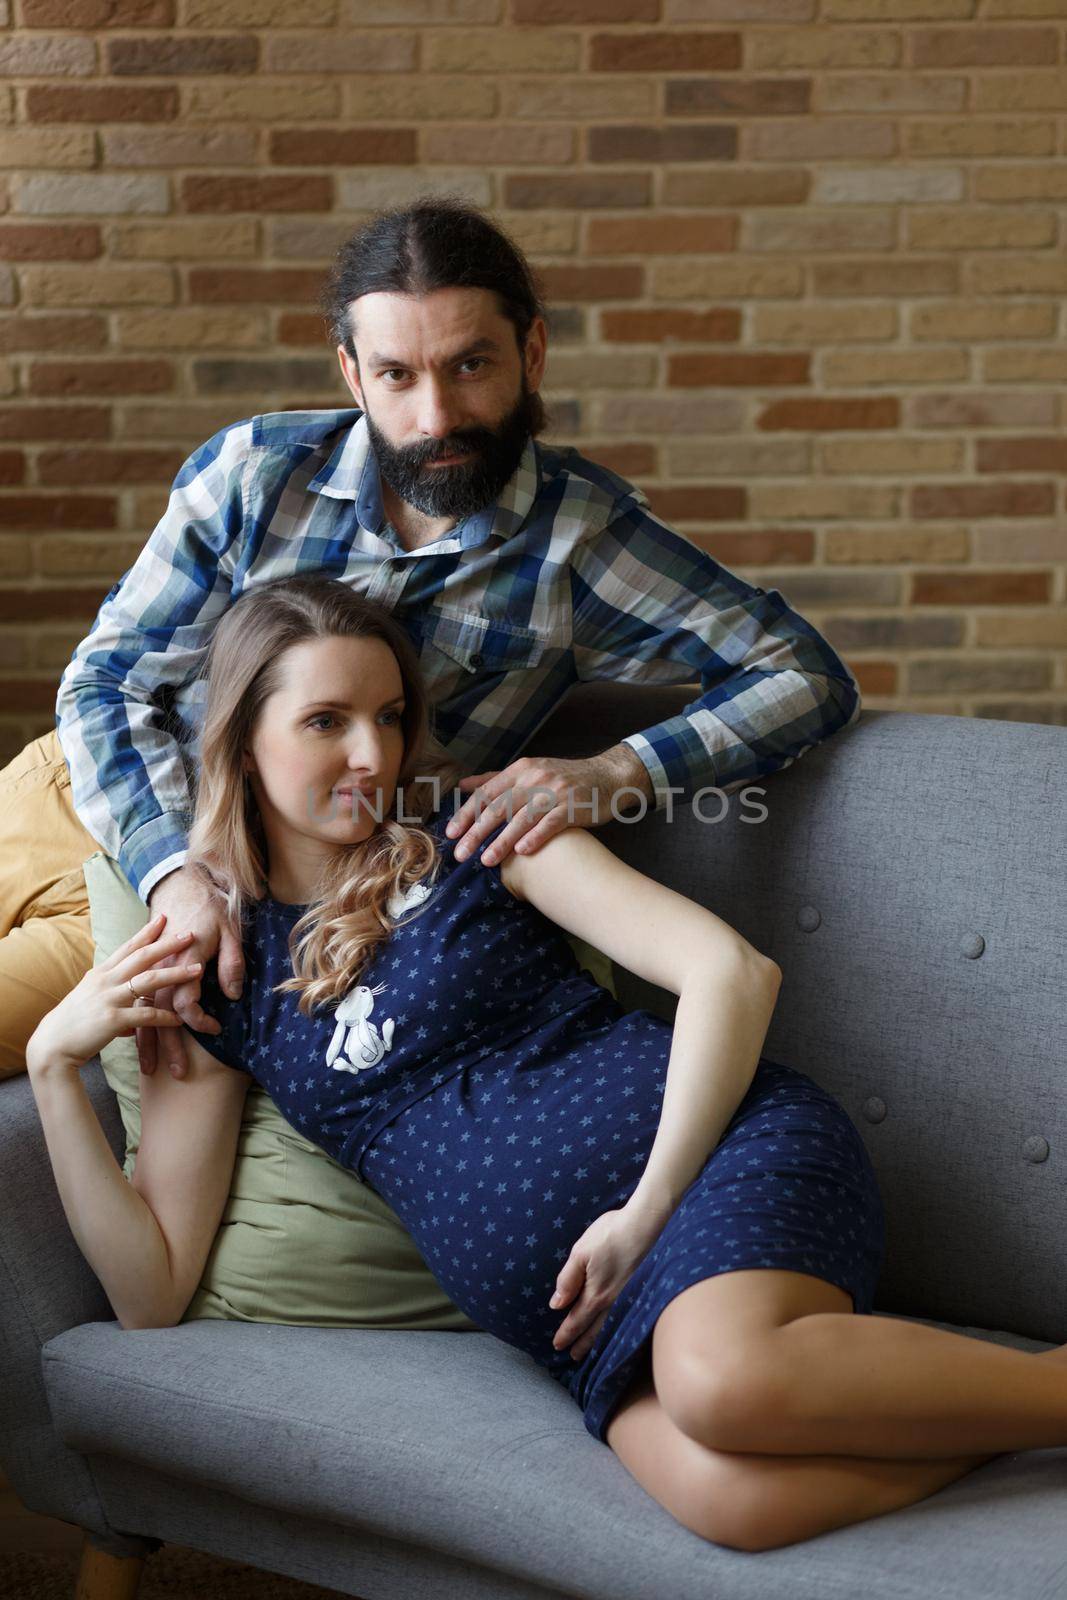 An adult couple in love waiting for a child. by BY-_-BY